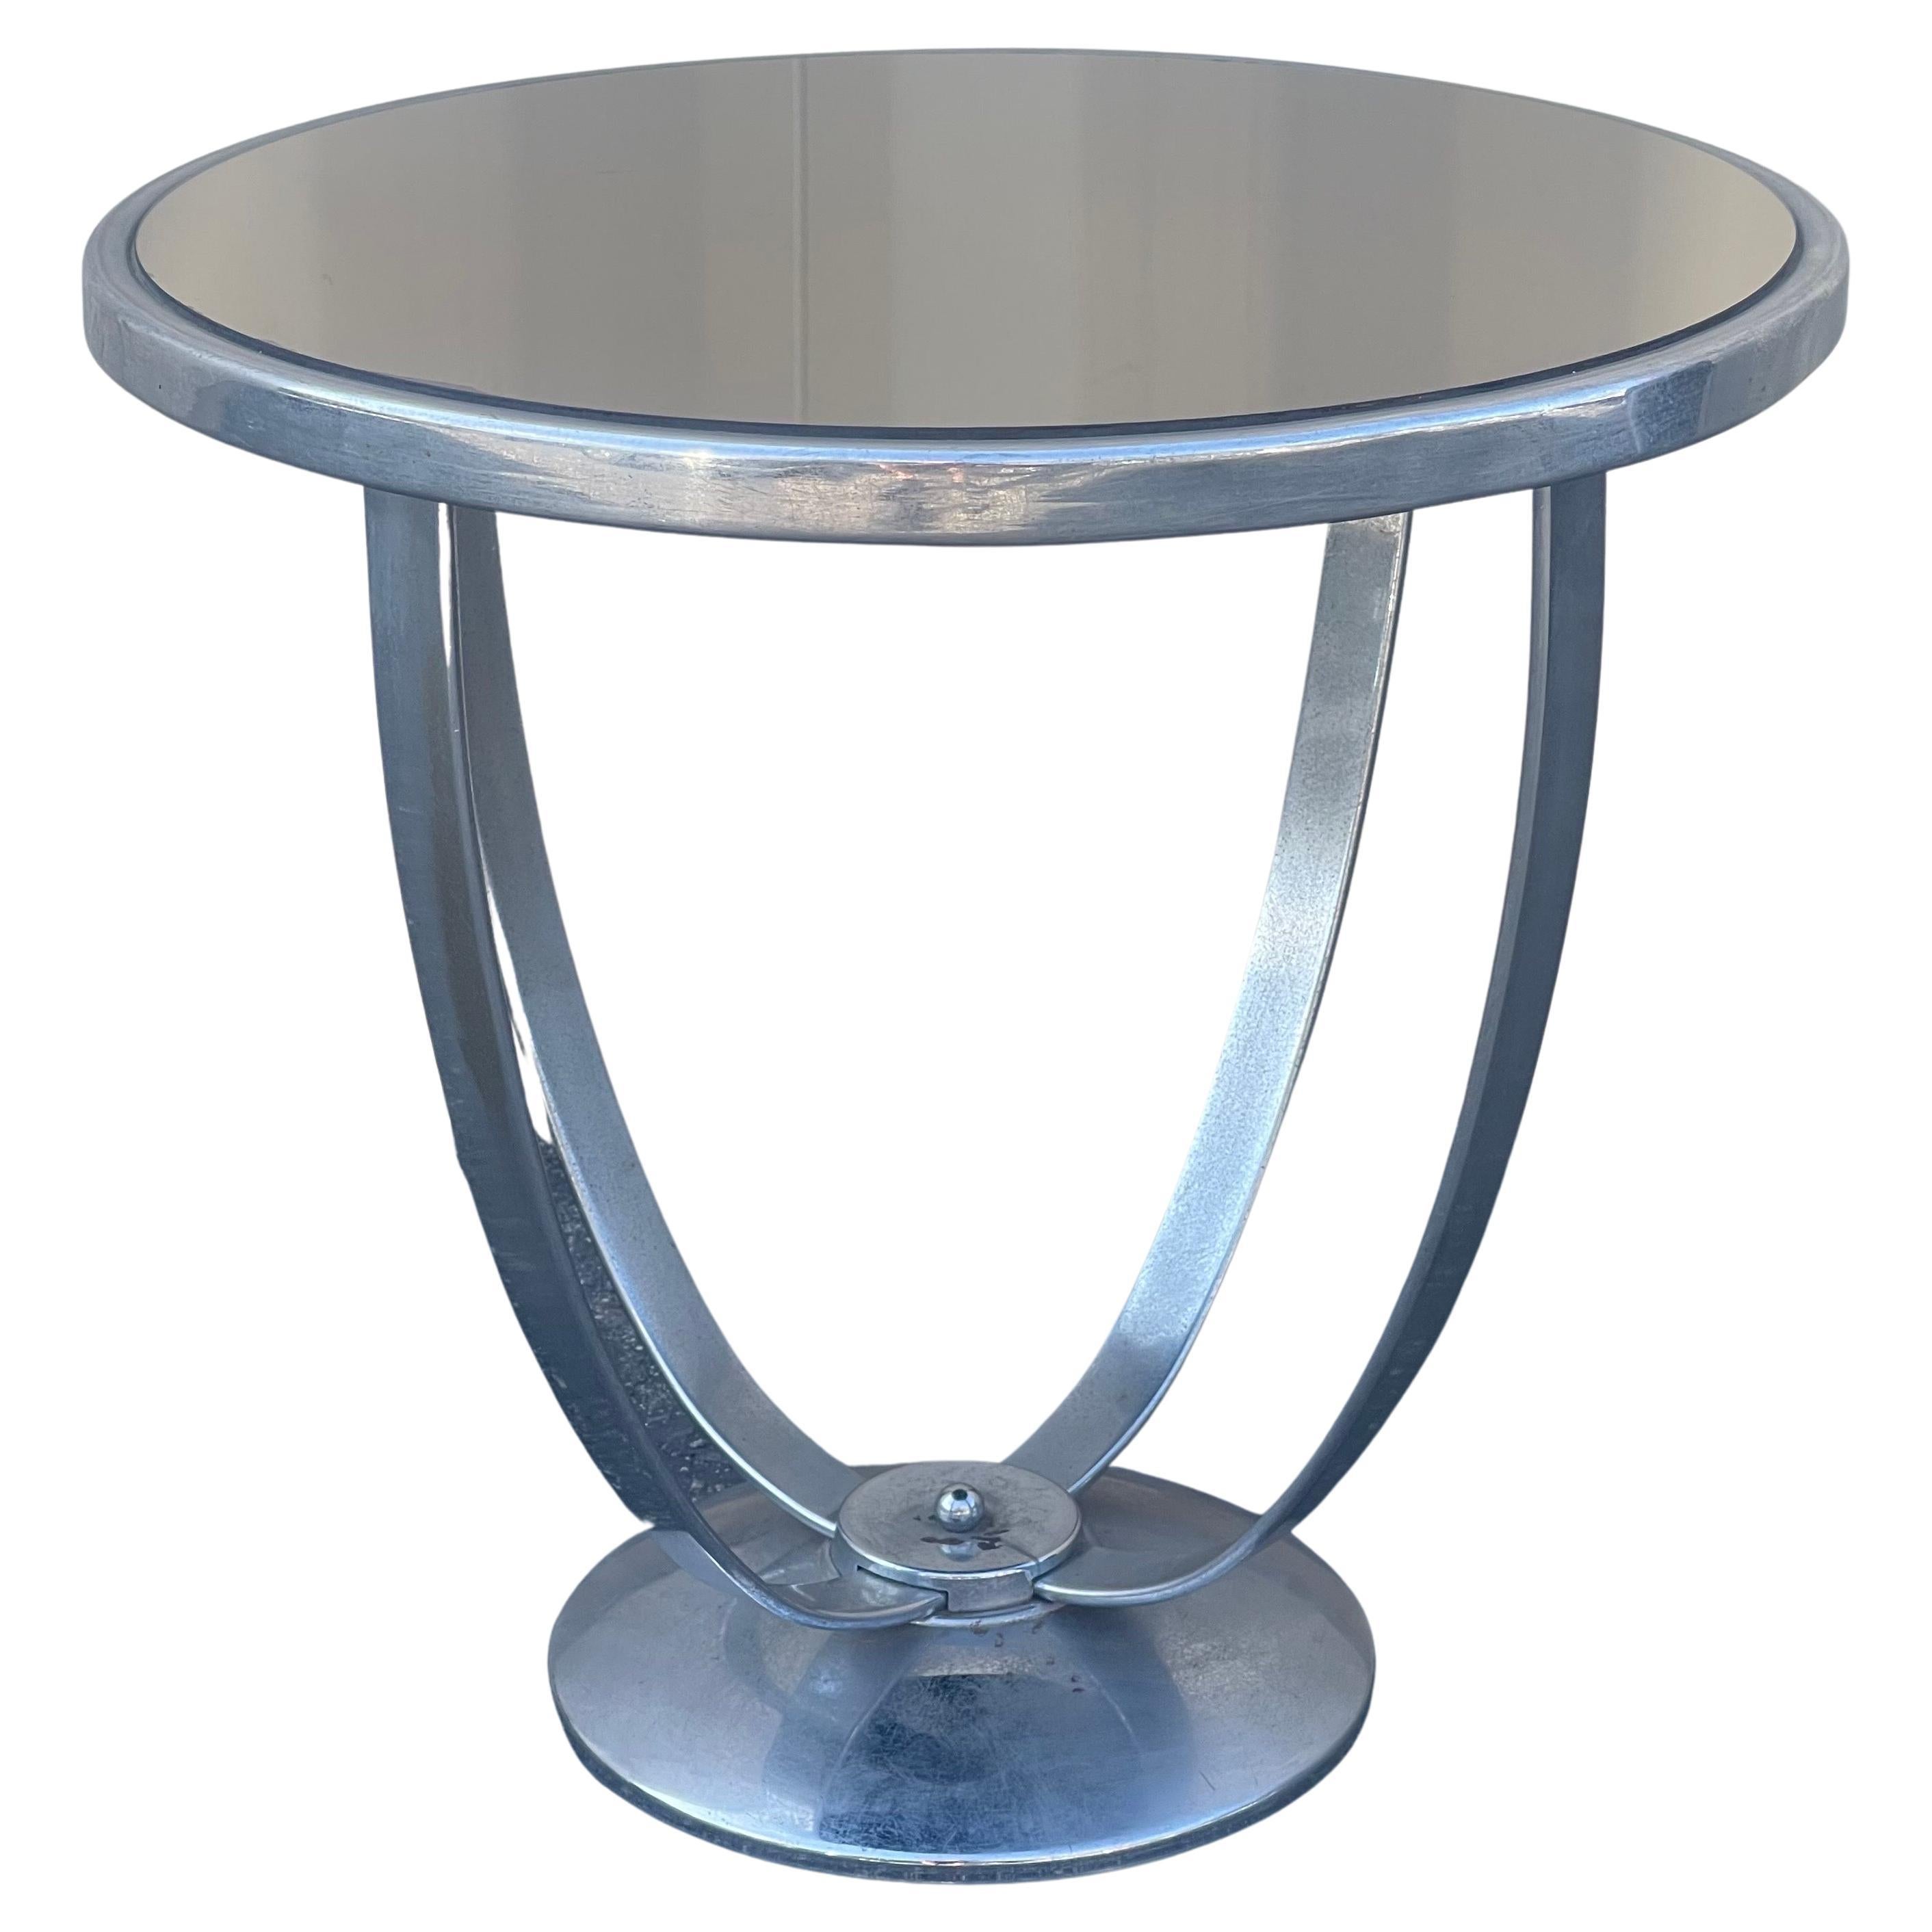 Art Deco Chrome with Mirrored Top Side Table by Wolfgang Hoffman for Howell Co. For Sale 11